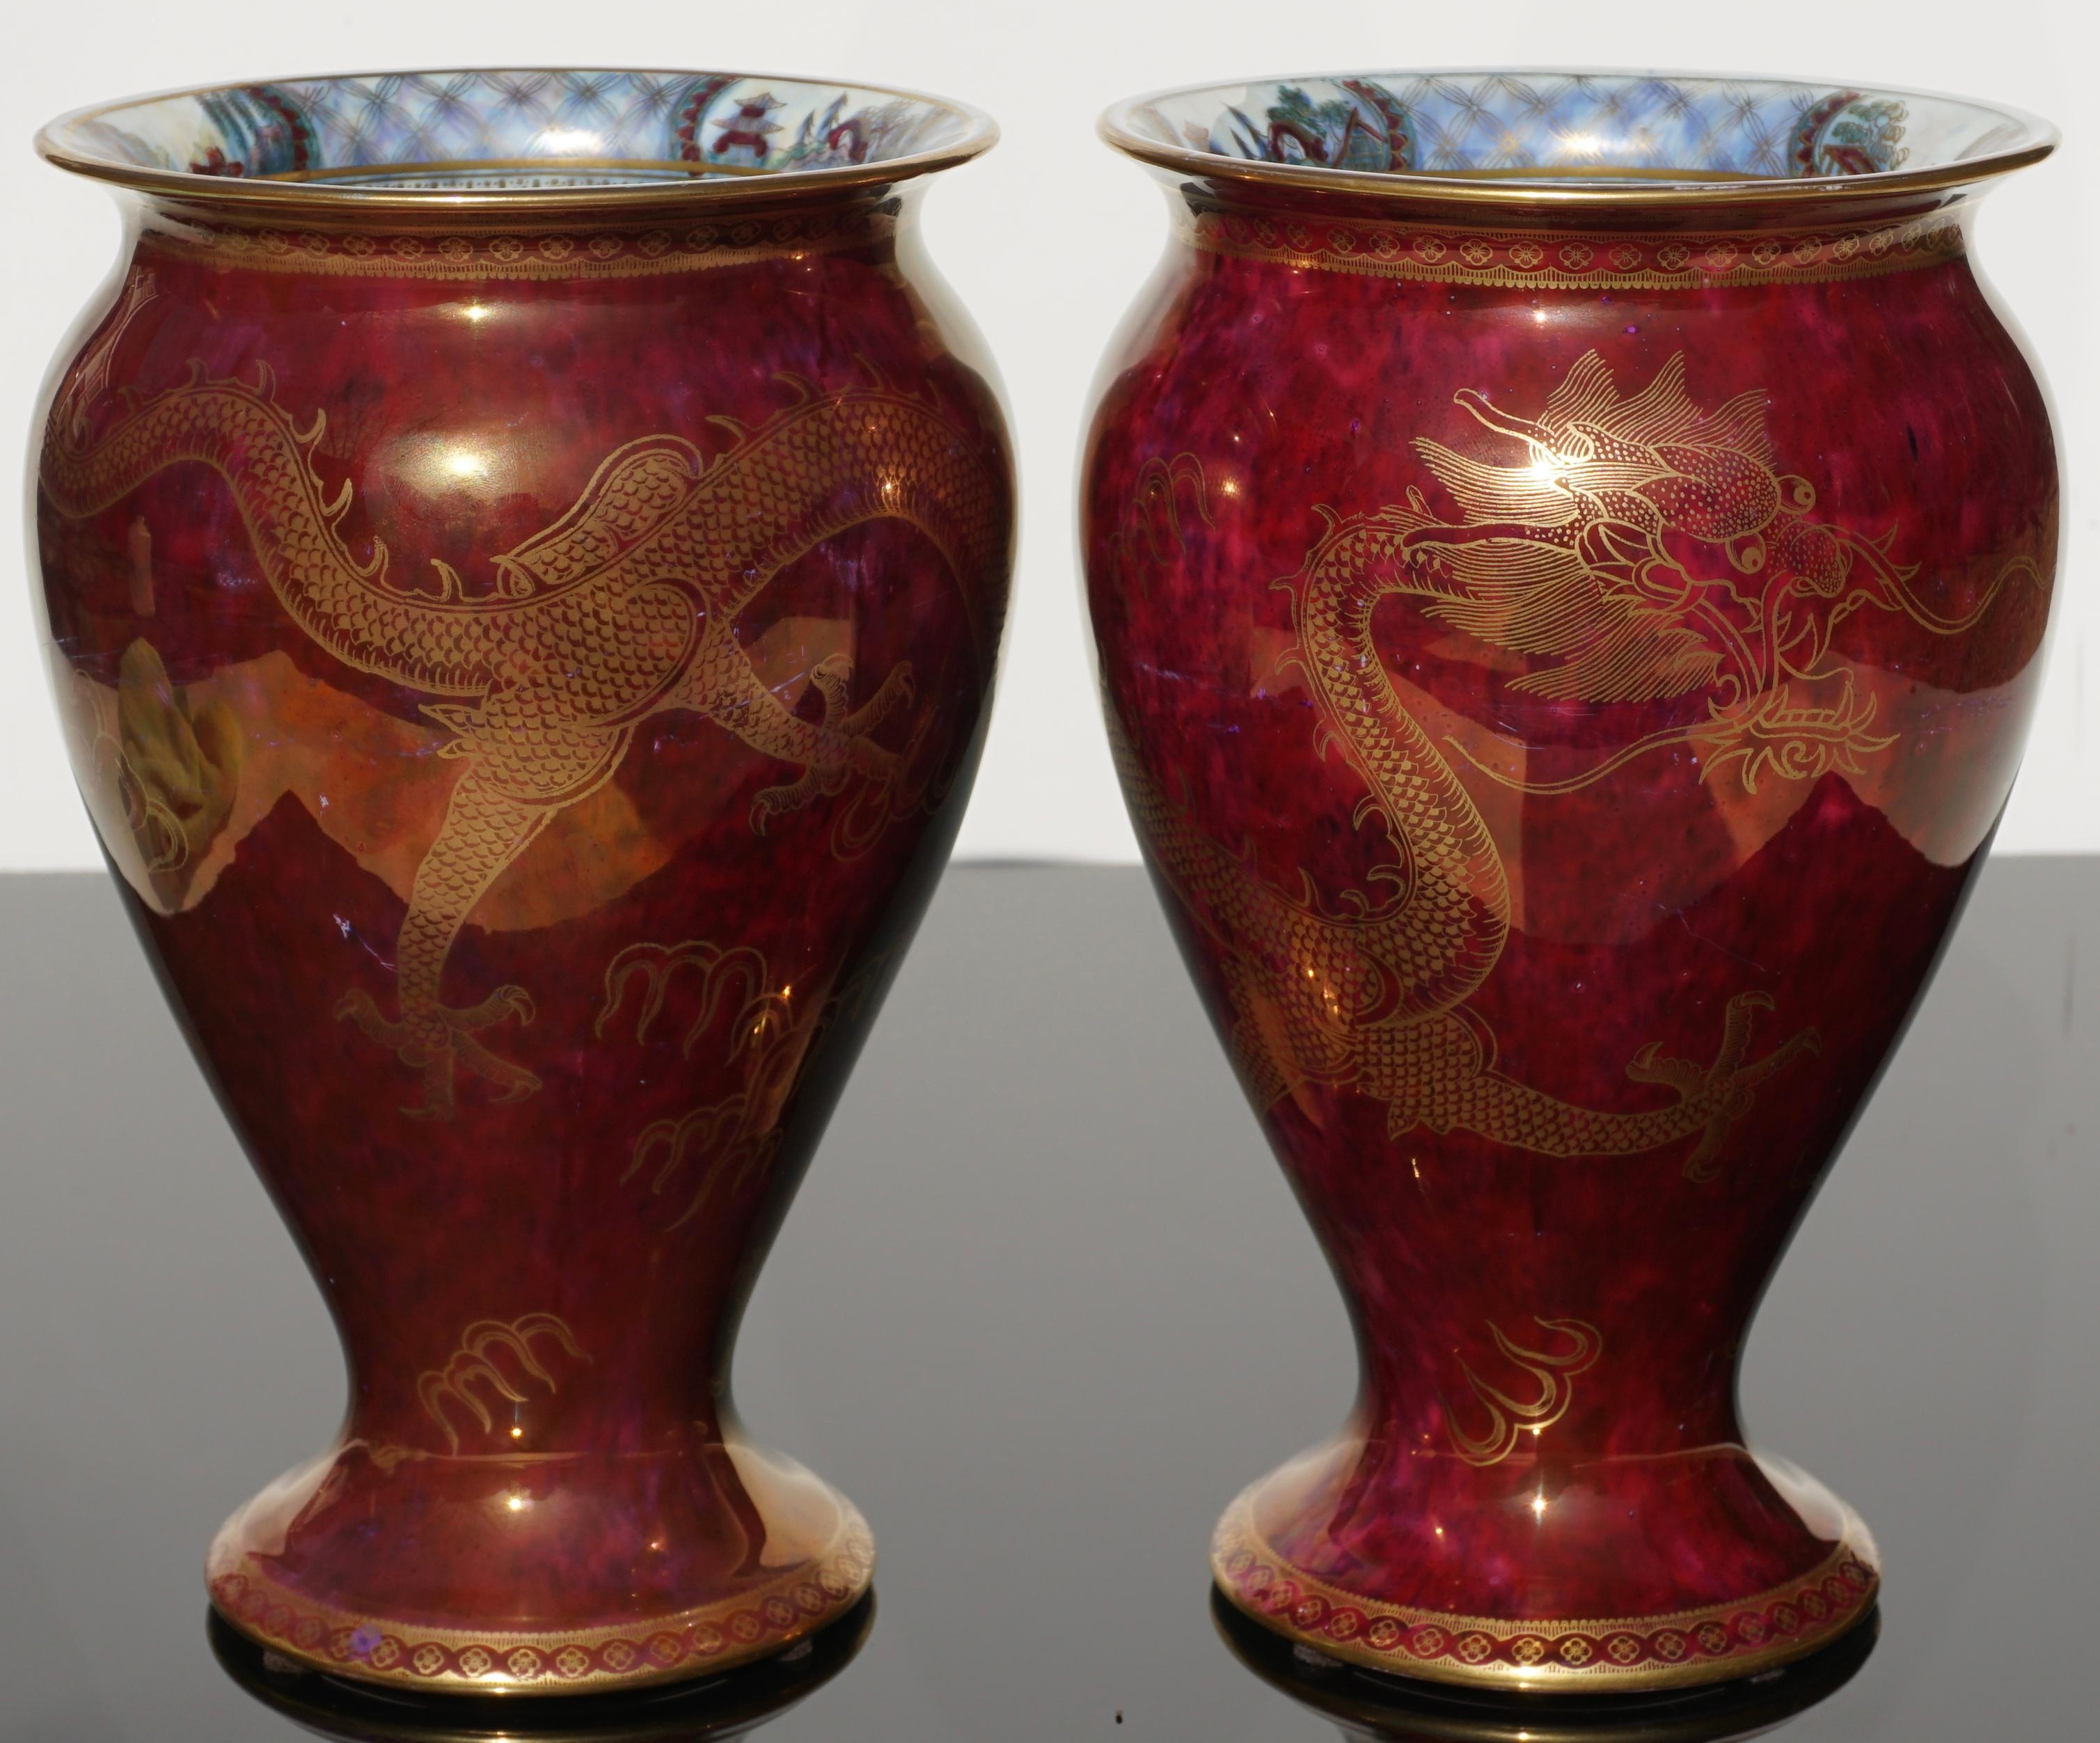 English Pair of Wedgwood Lustre Red Dragon Vases, 1900